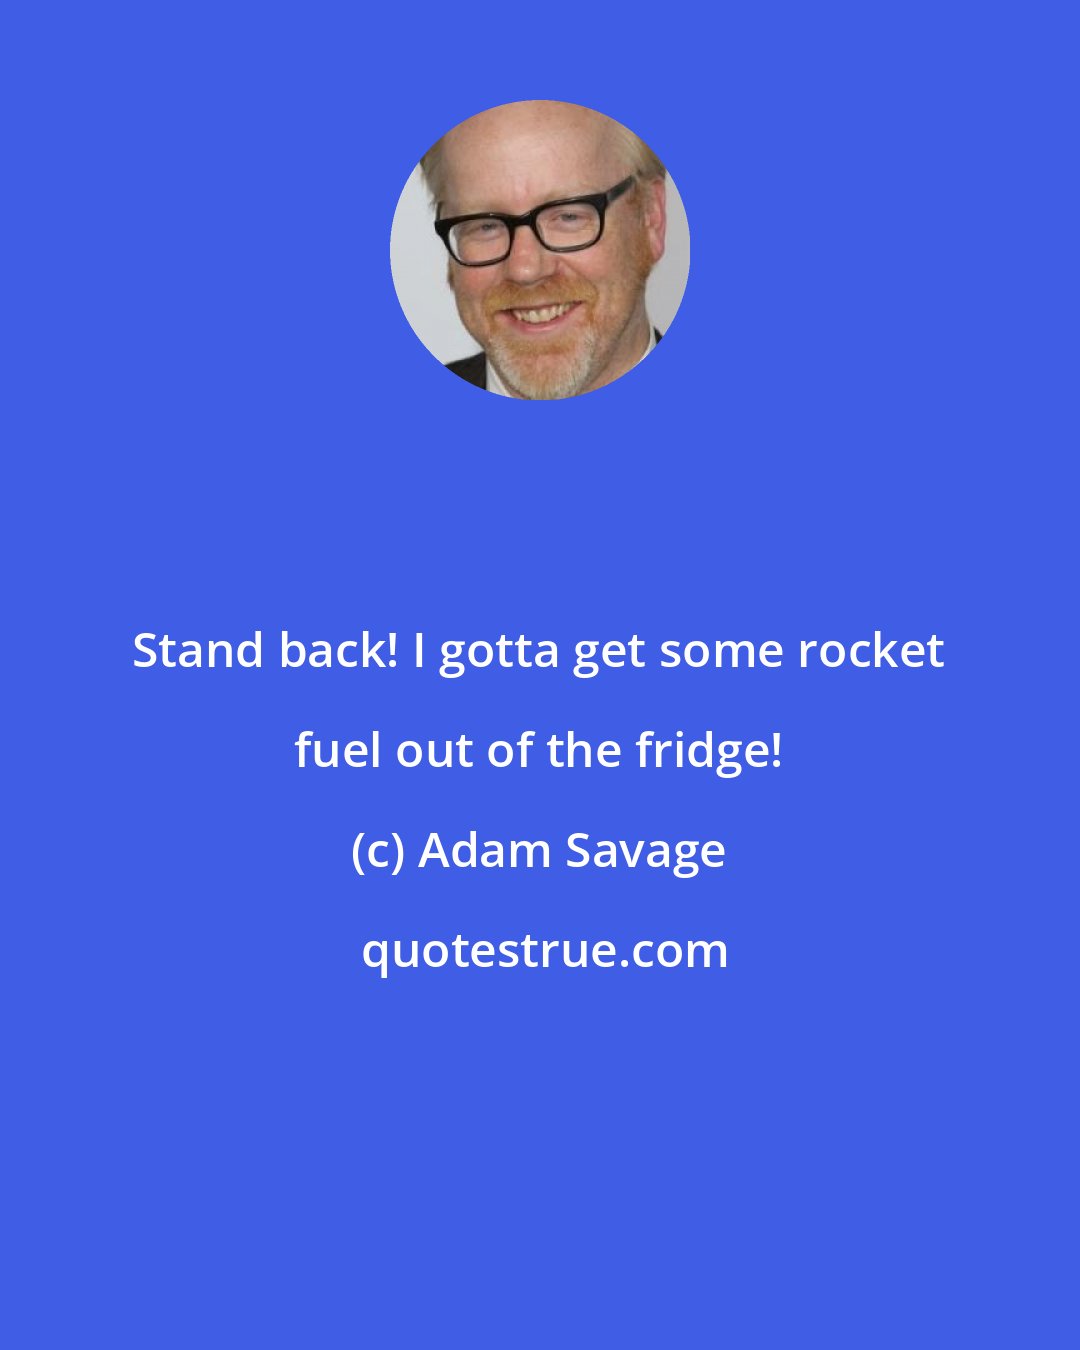 Adam Savage: Stand back! I gotta get some rocket fuel out of the fridge!